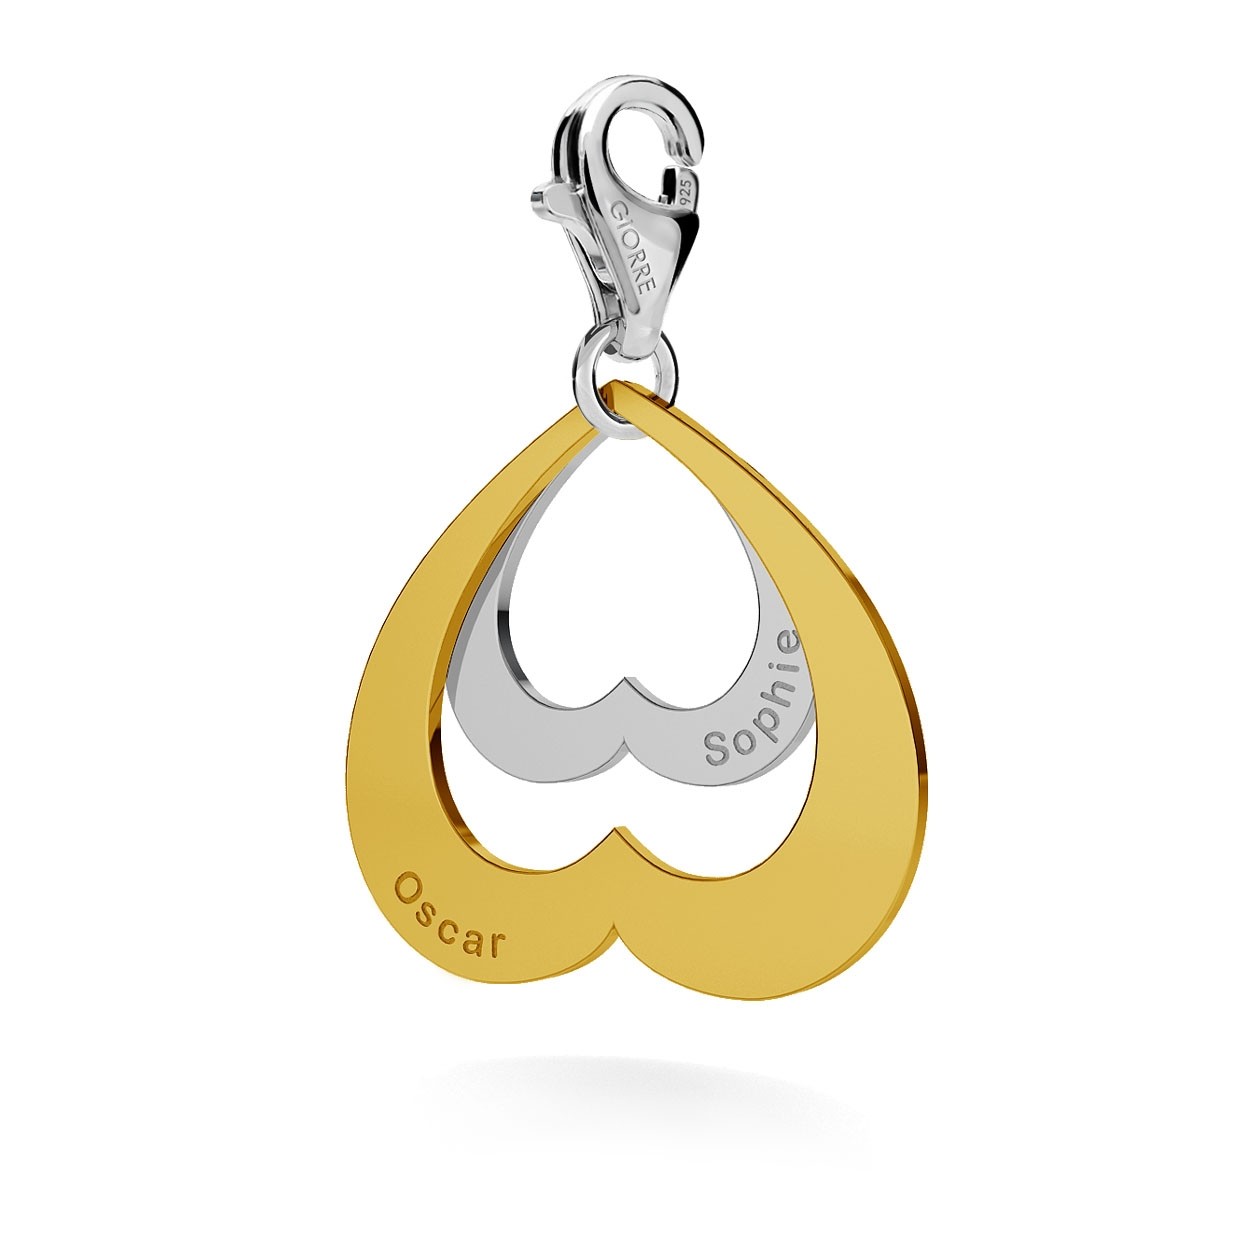 CHARM 79, UPSIDE DOWN HEART SILVER 925, RHODIUM OR GOLD PLATED